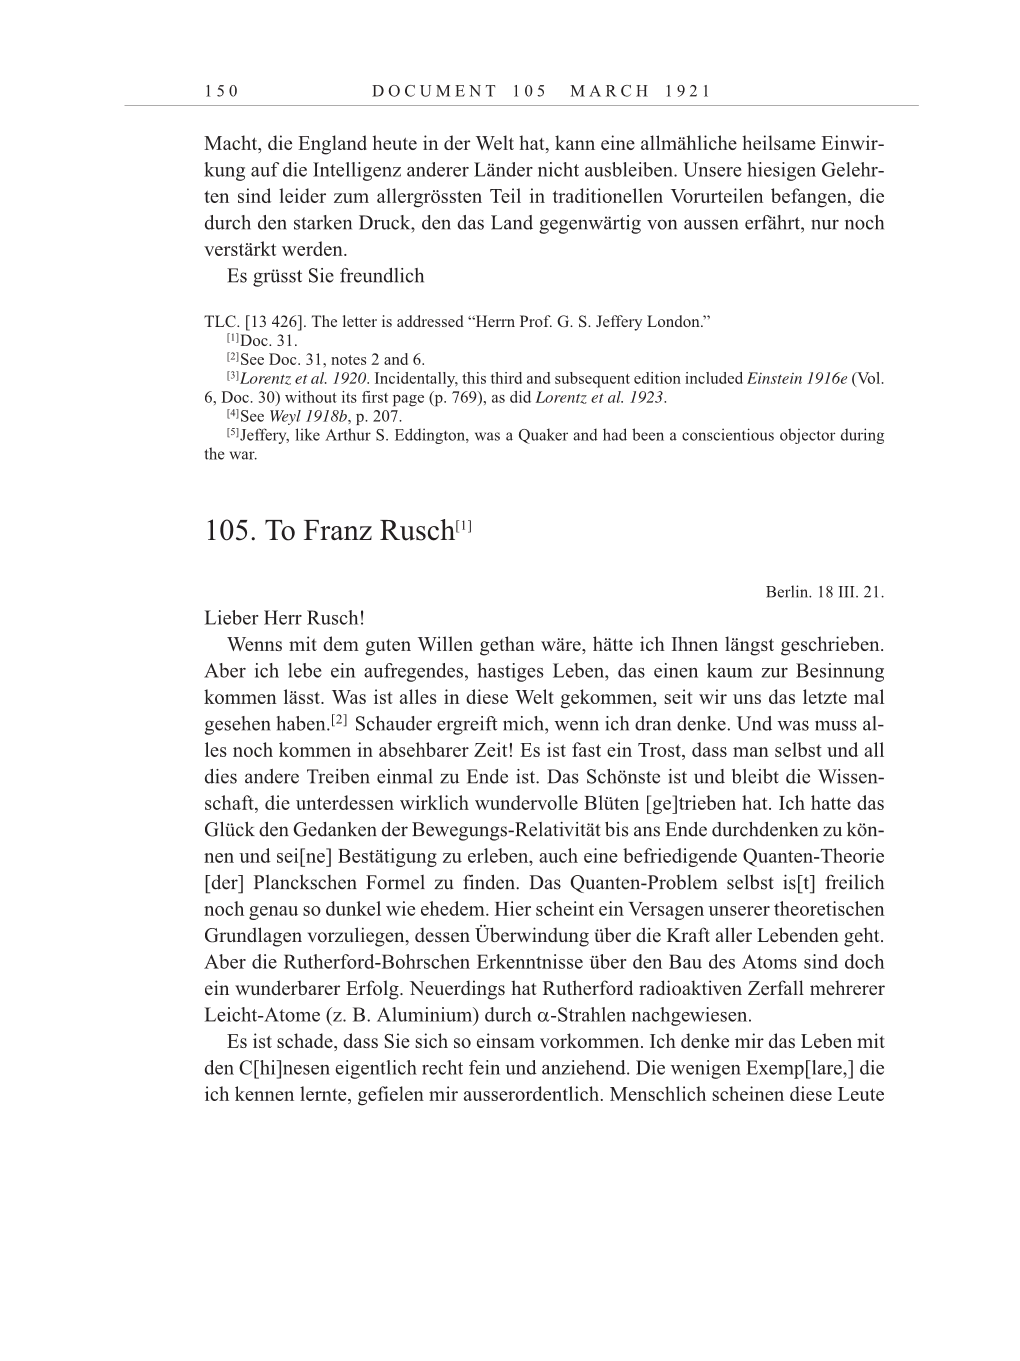 Volume 12: The Berlin Years: Correspondence January-December 1921 page 150